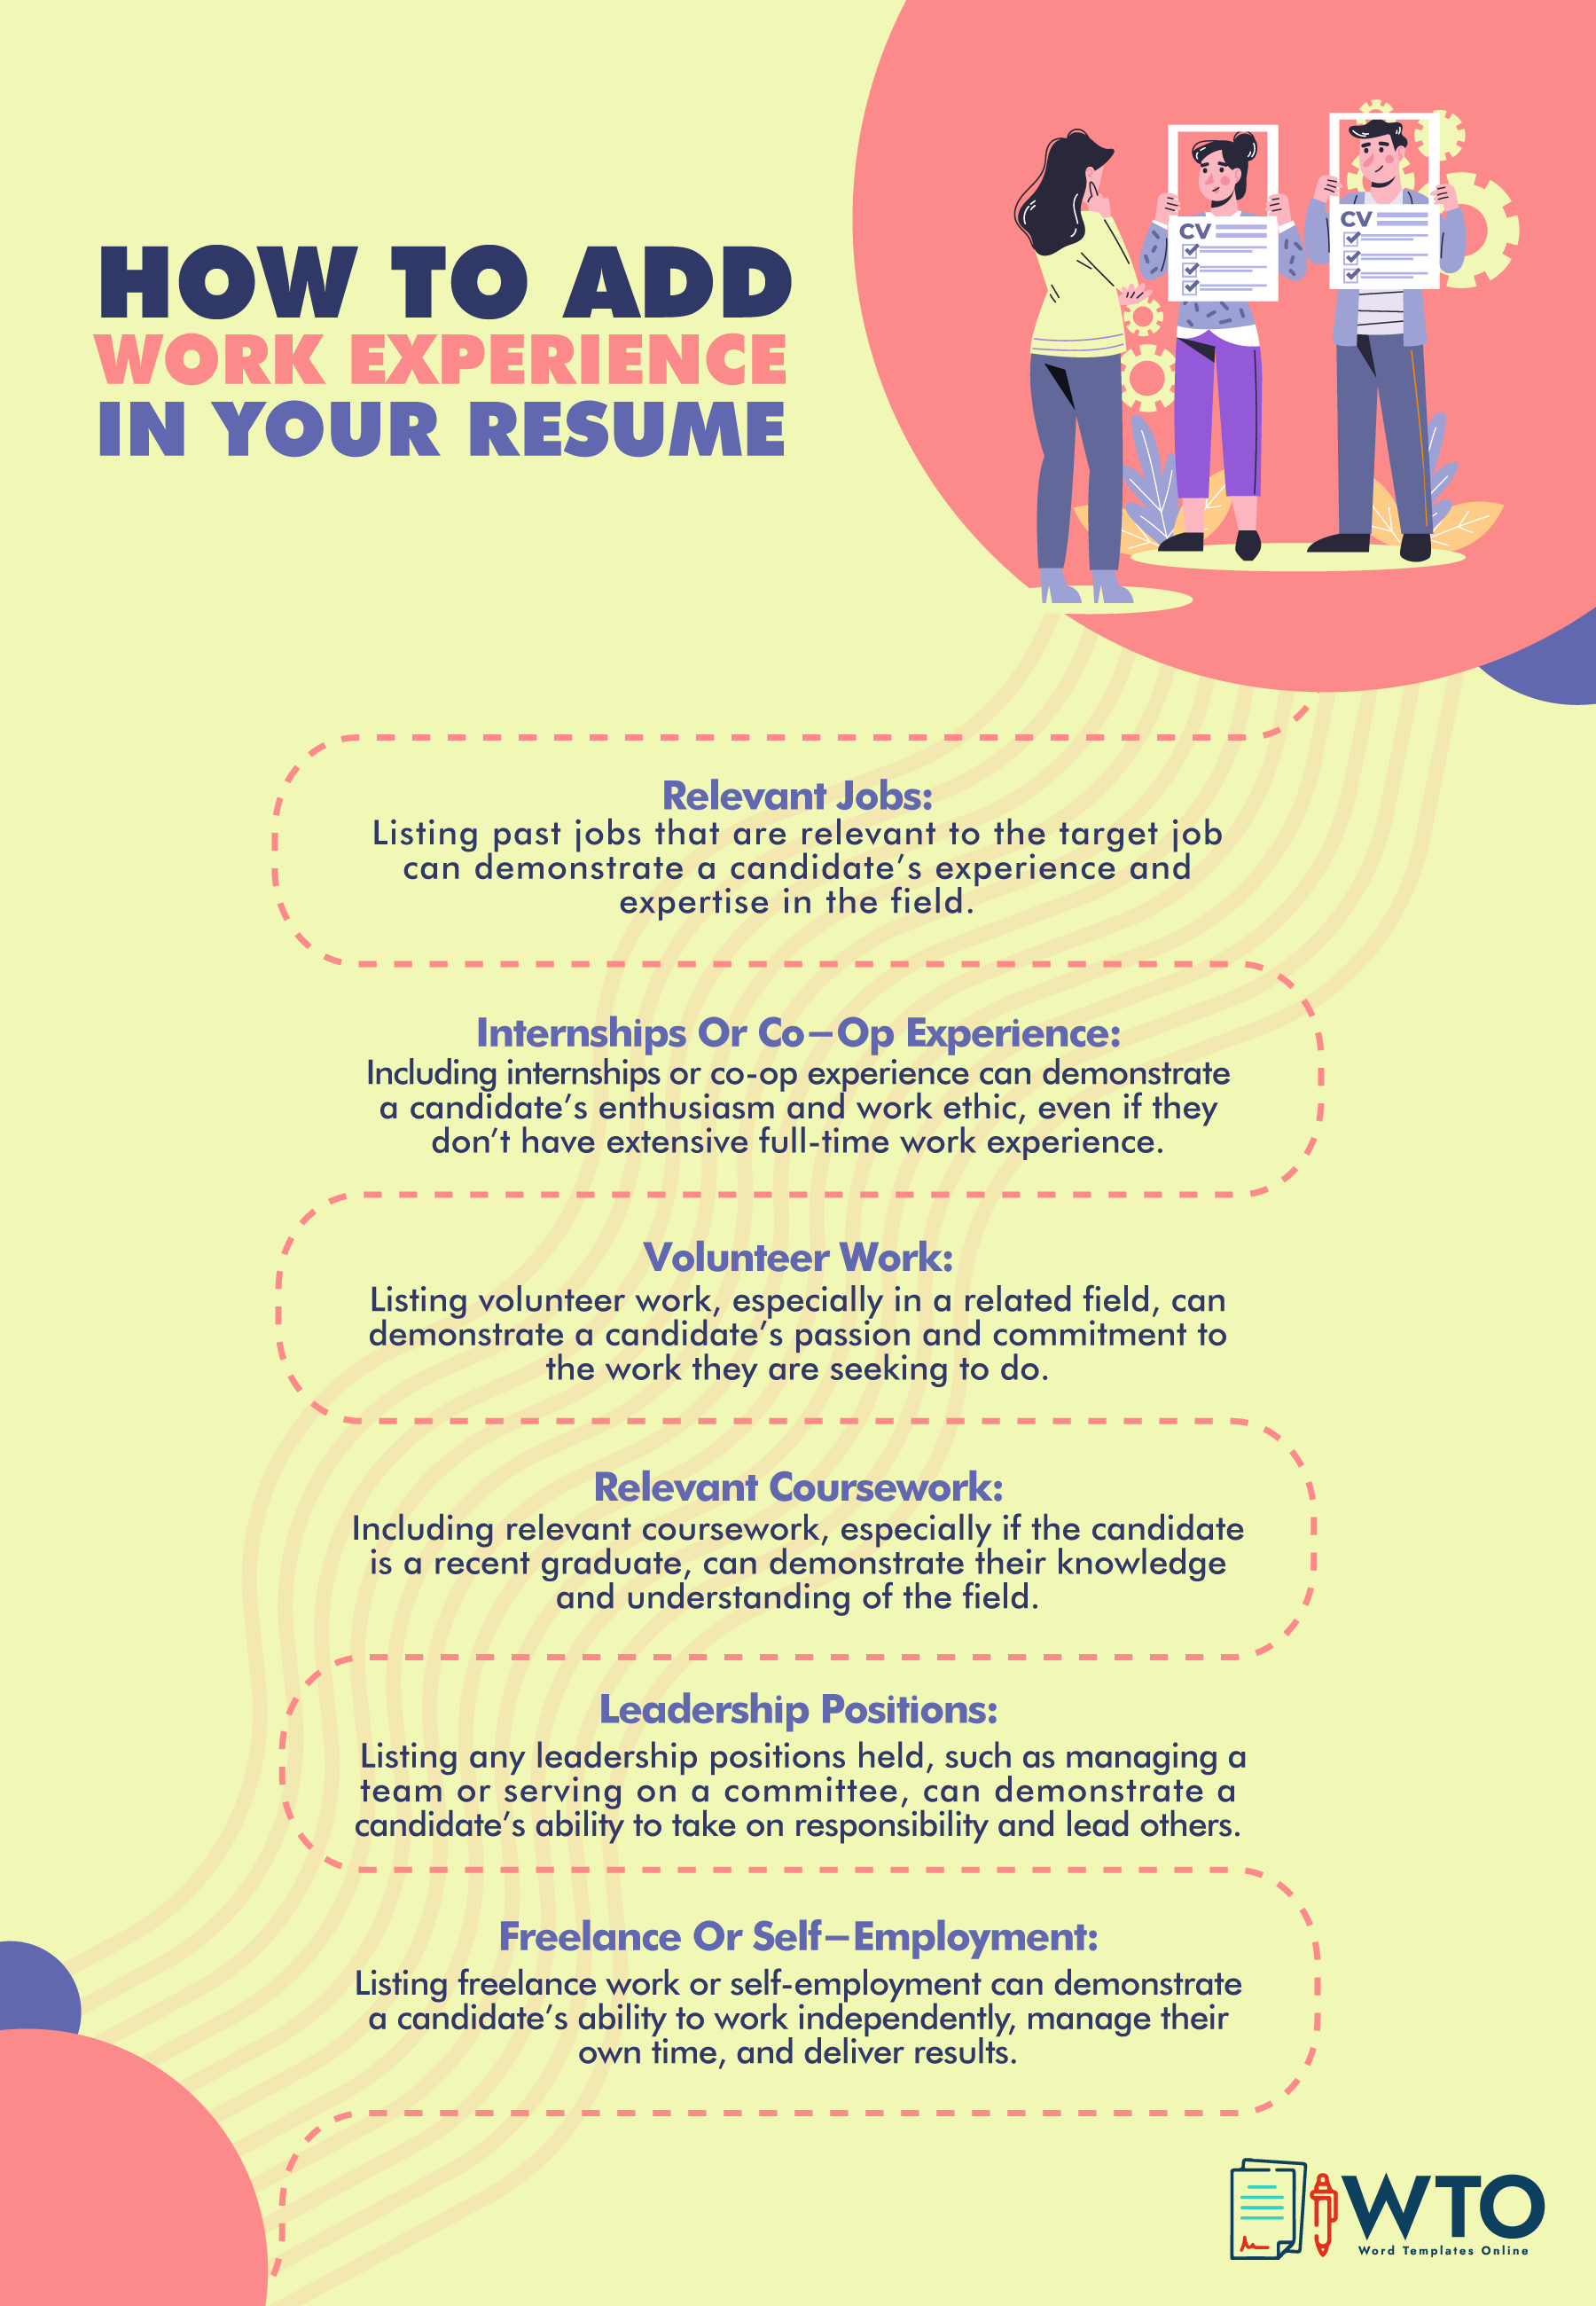 This infographic is about adding work experience in resume. 